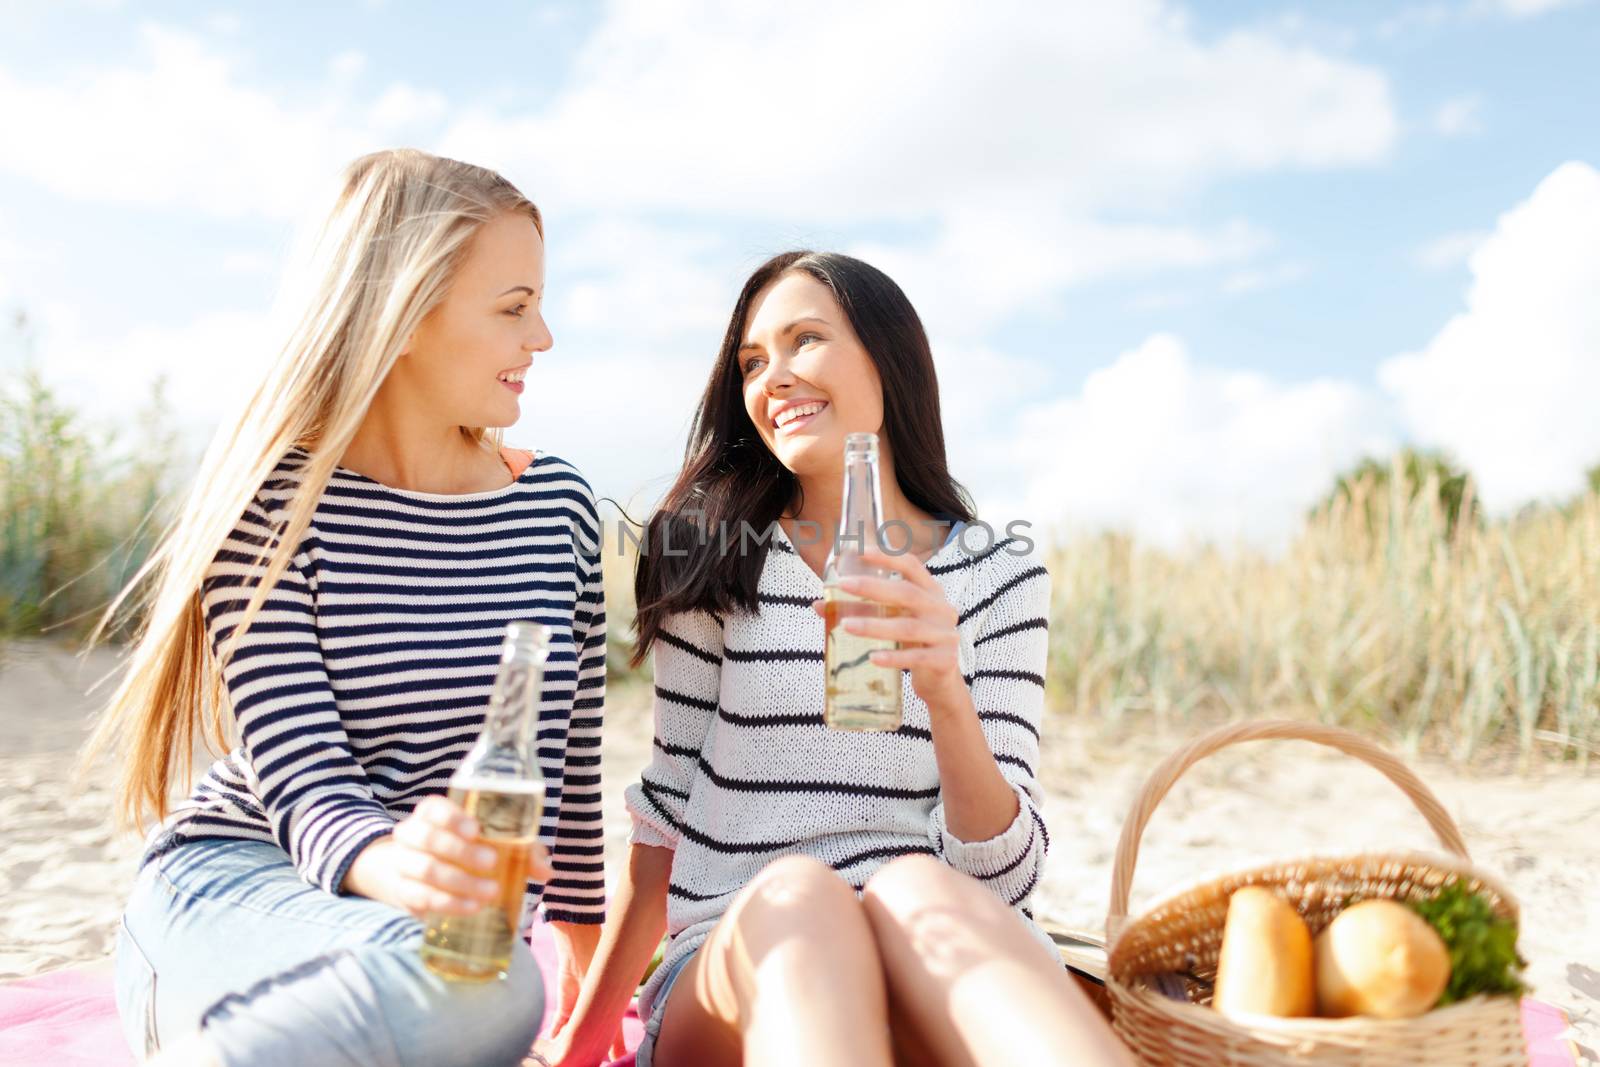 summer holidays, vacation, celebration and people concept - happy teenage girls or young women having picnic and drinking beer or lemonade on beach